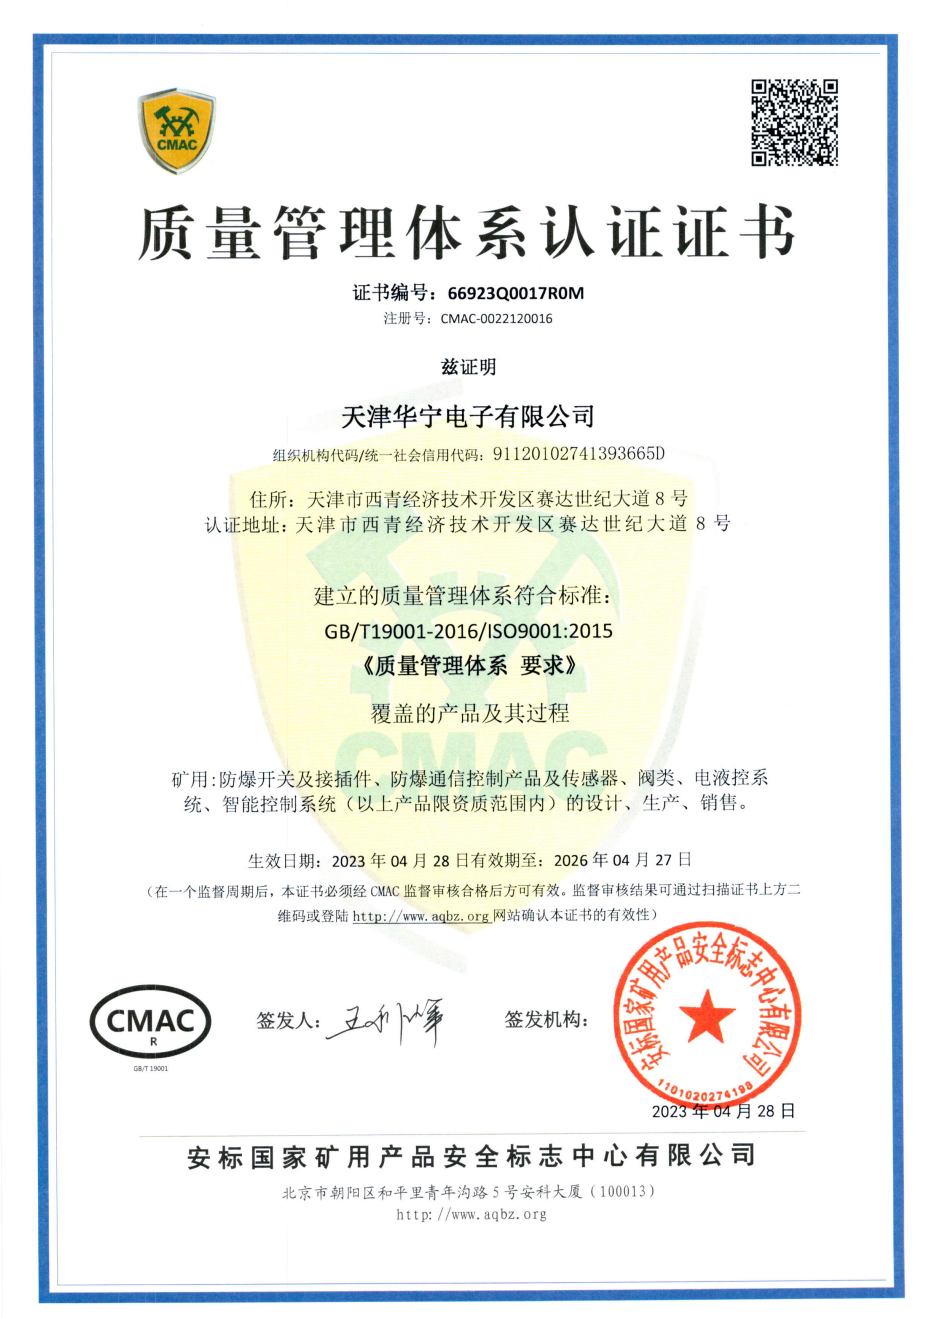 ISO9001：2015